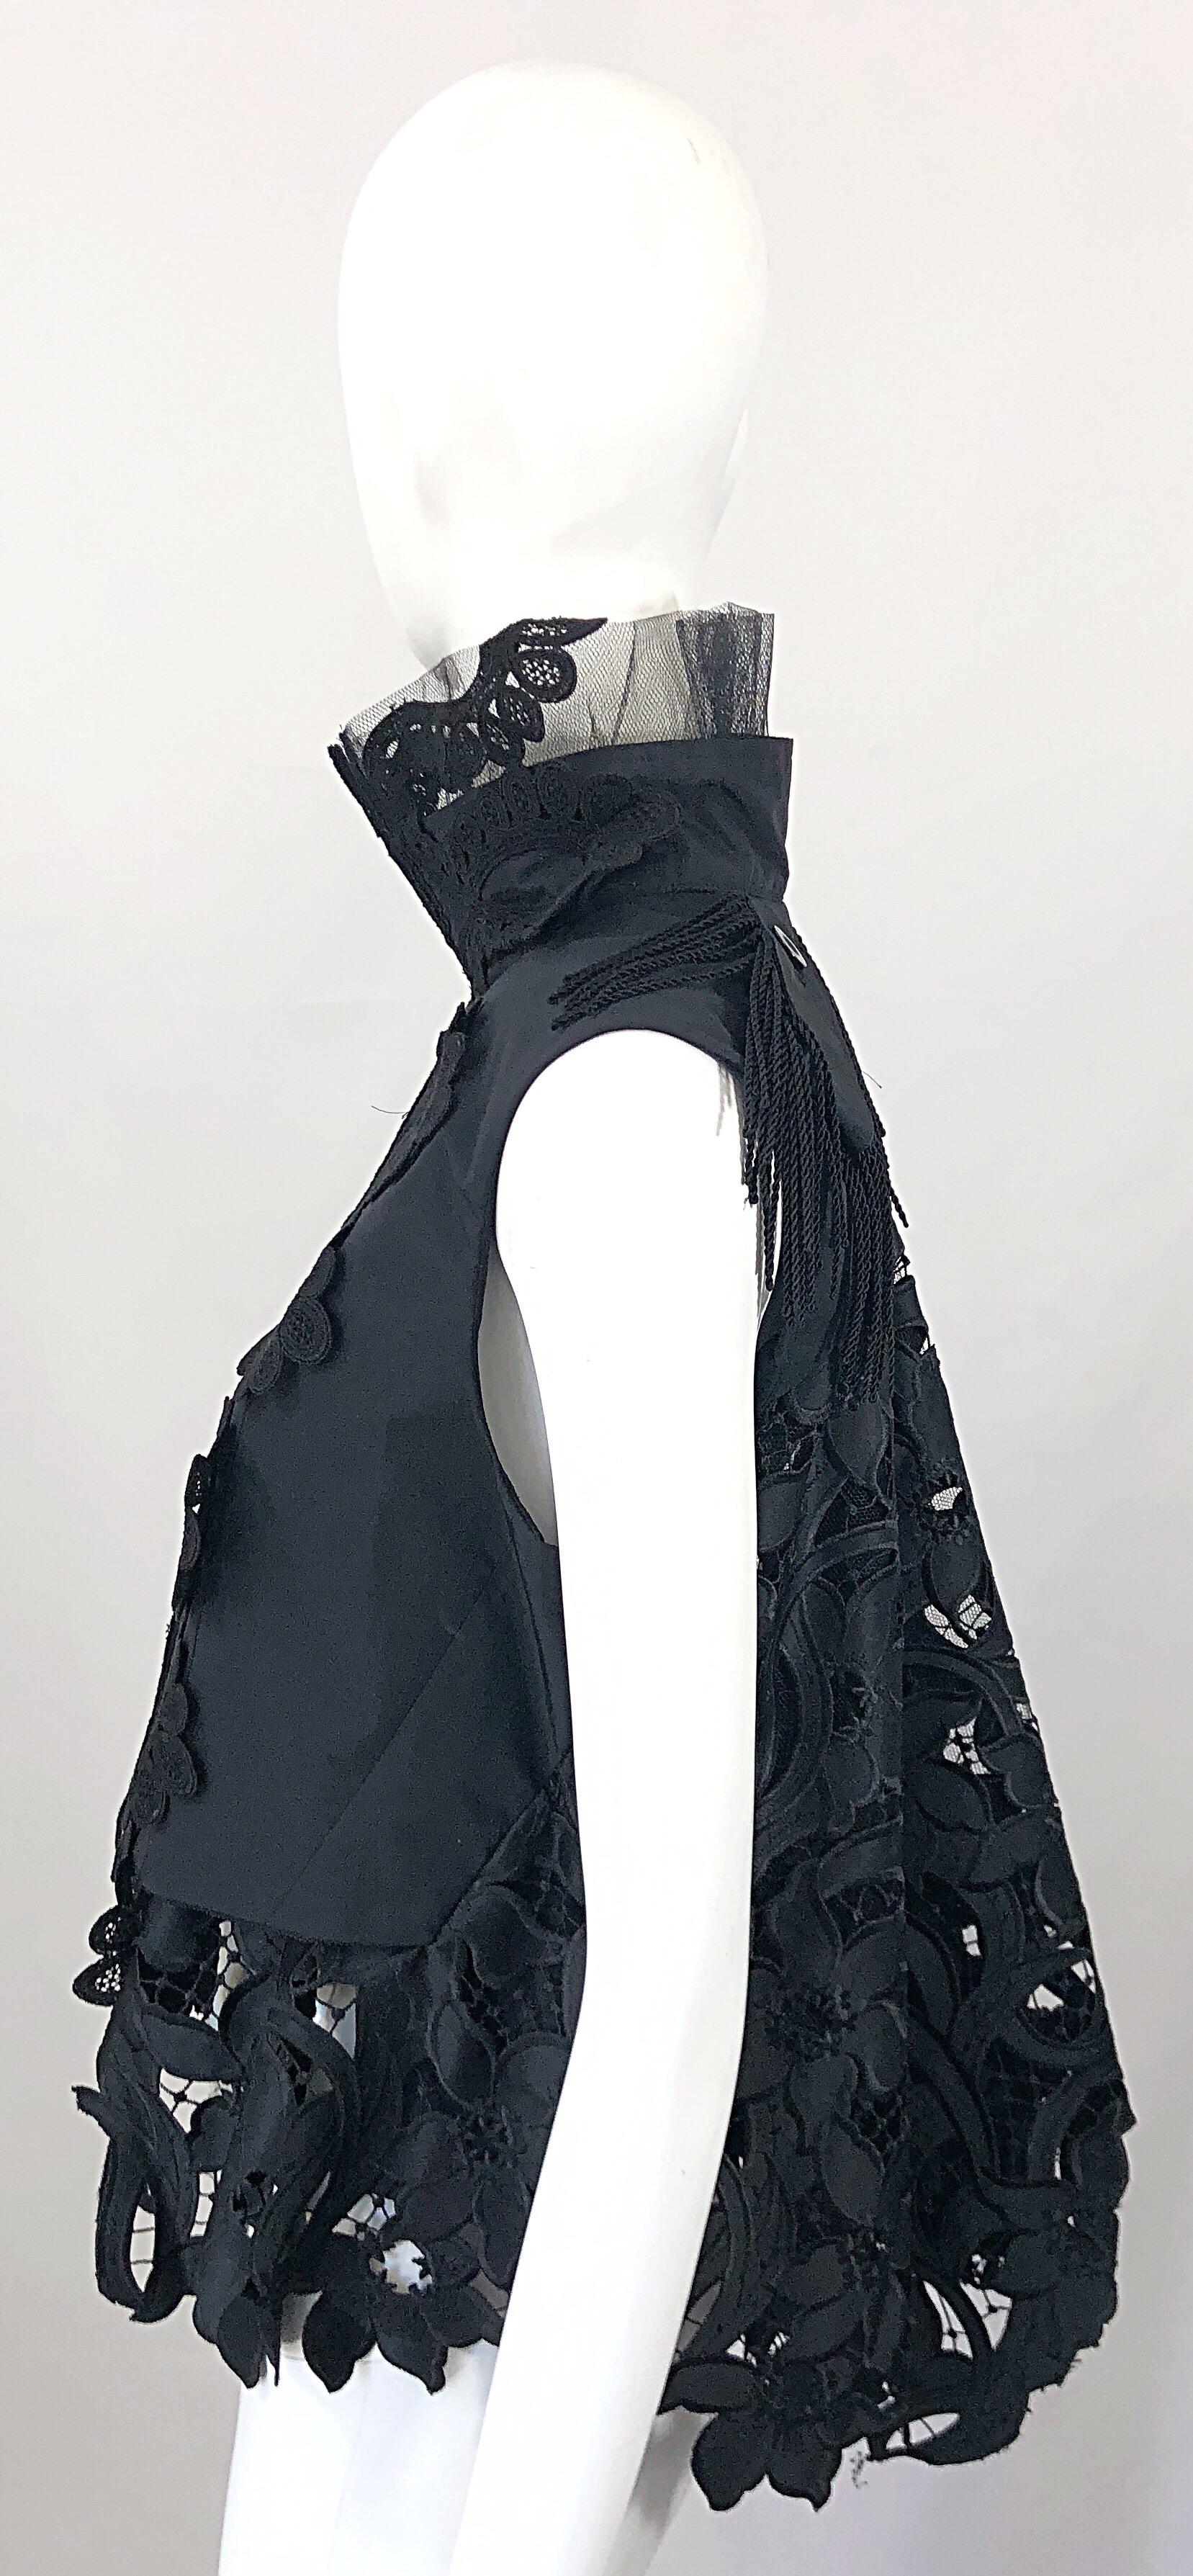 Incredible and super rare SACAI Japanese designed Avant Garde black trapeze vest top! Features intractley sewn lace and mesh throughout. Hook-and-eye closures up the front. Black corded tassel fringe at front and back of the shoulders. 
The design